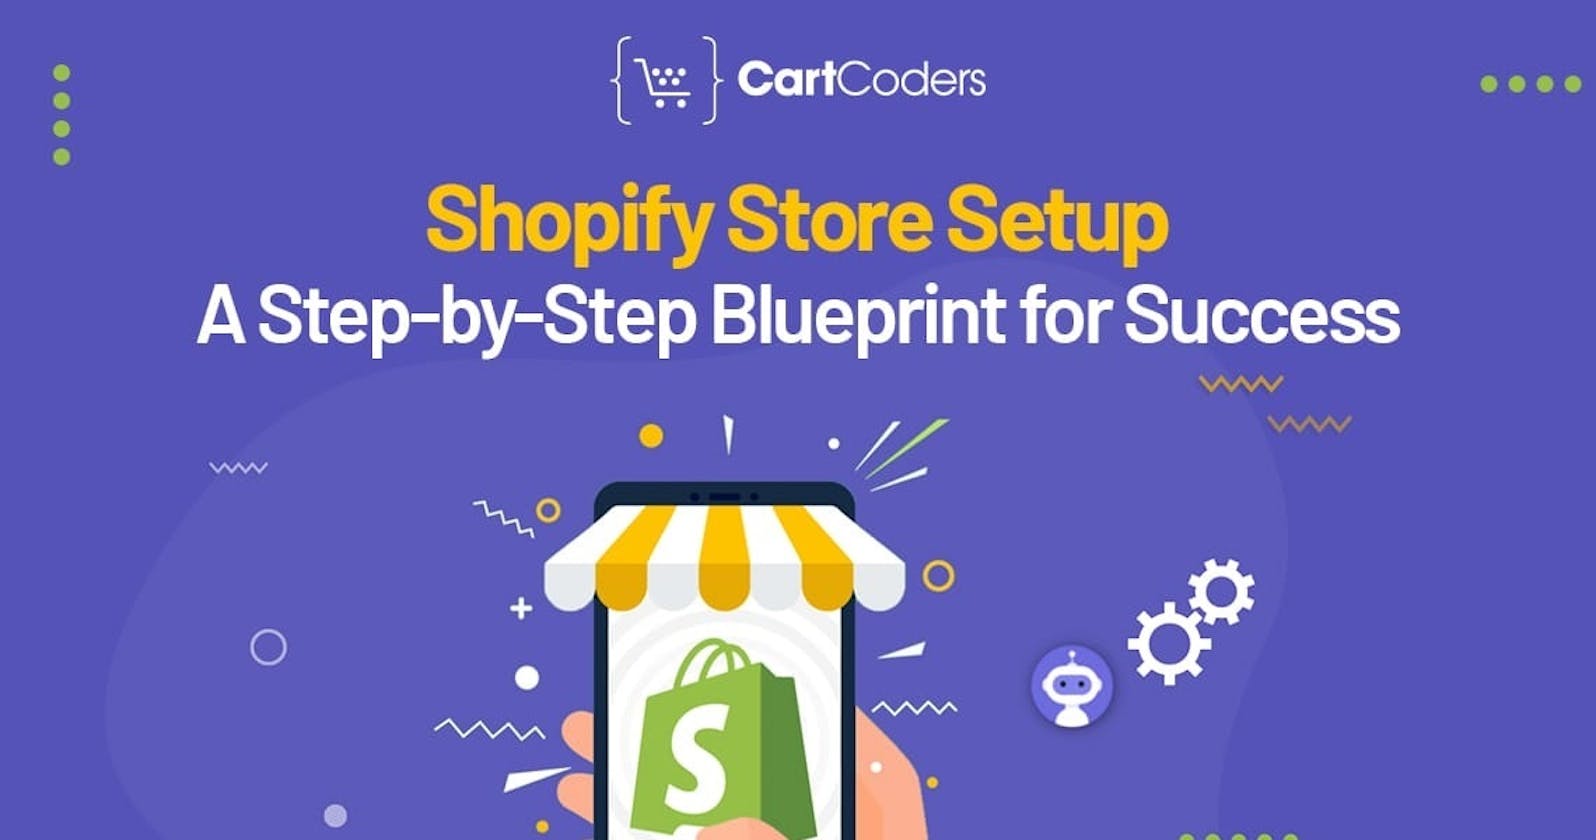 Shopify Store Setup: A Step-by-Step Blueprint for Success